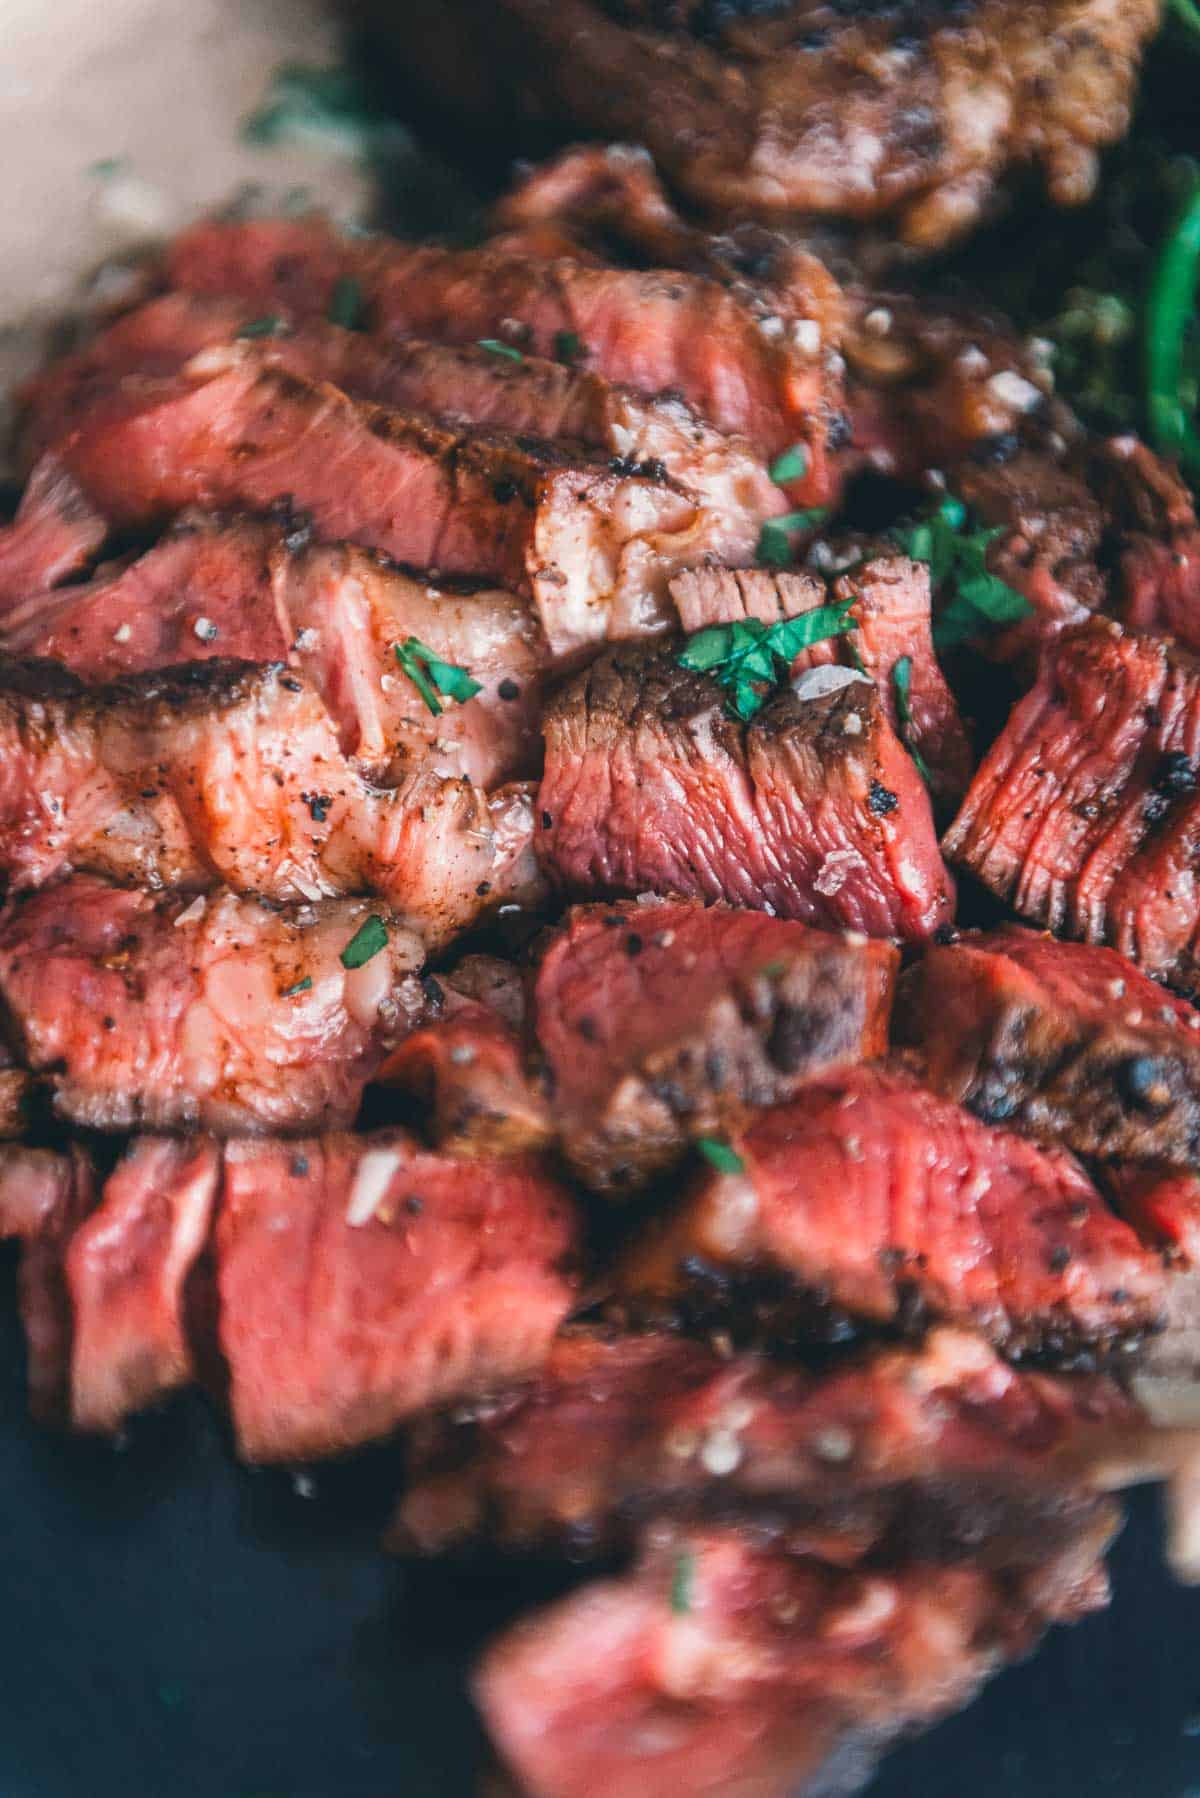 Close up of succulent sliced steak to highlight juiciness and tenderness from sous vide cooking.